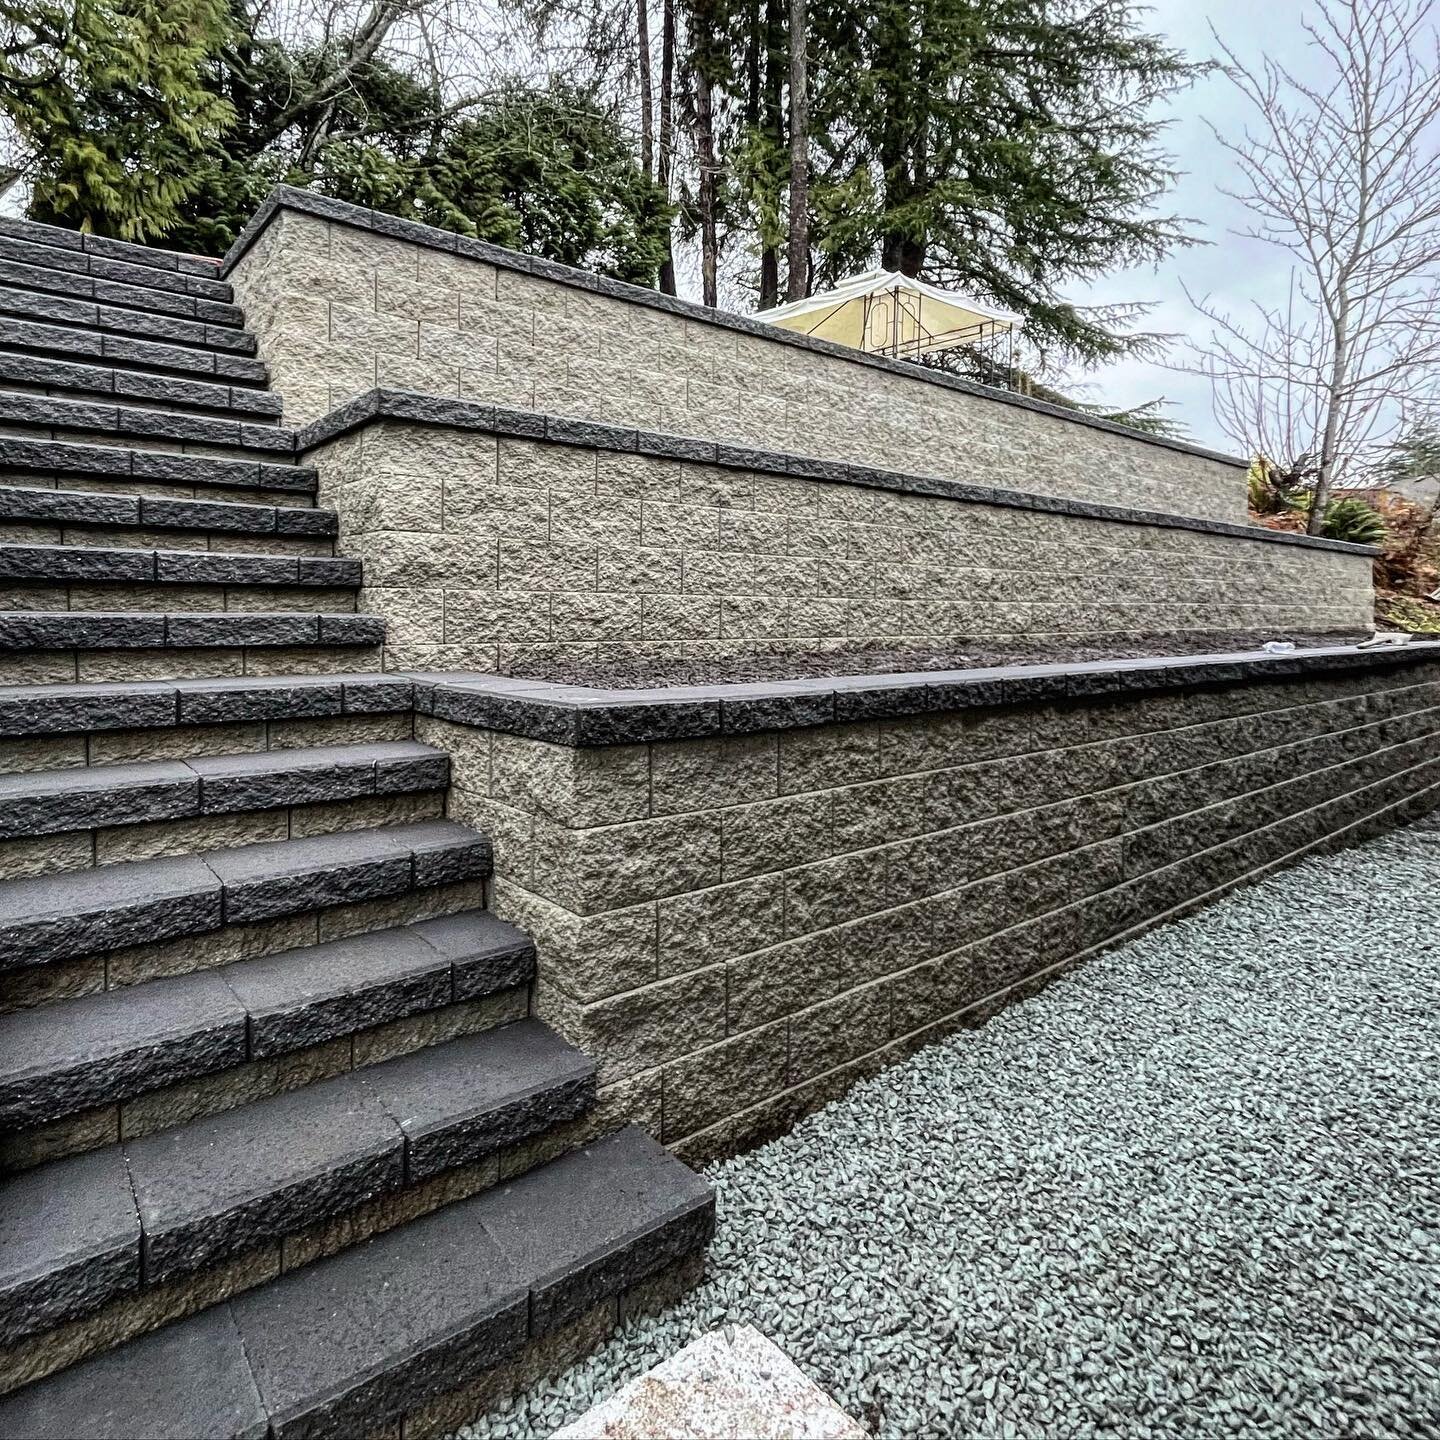 Brand new three-tiered retaining walls installed in only 5 days! Swipe ➡️ to see before and afters! We work year round and rain or shine. #mountainscape #hardscape #howtohardscape #pavingstones #retainingwalls #landscape #pnw #vancouver #northshore #